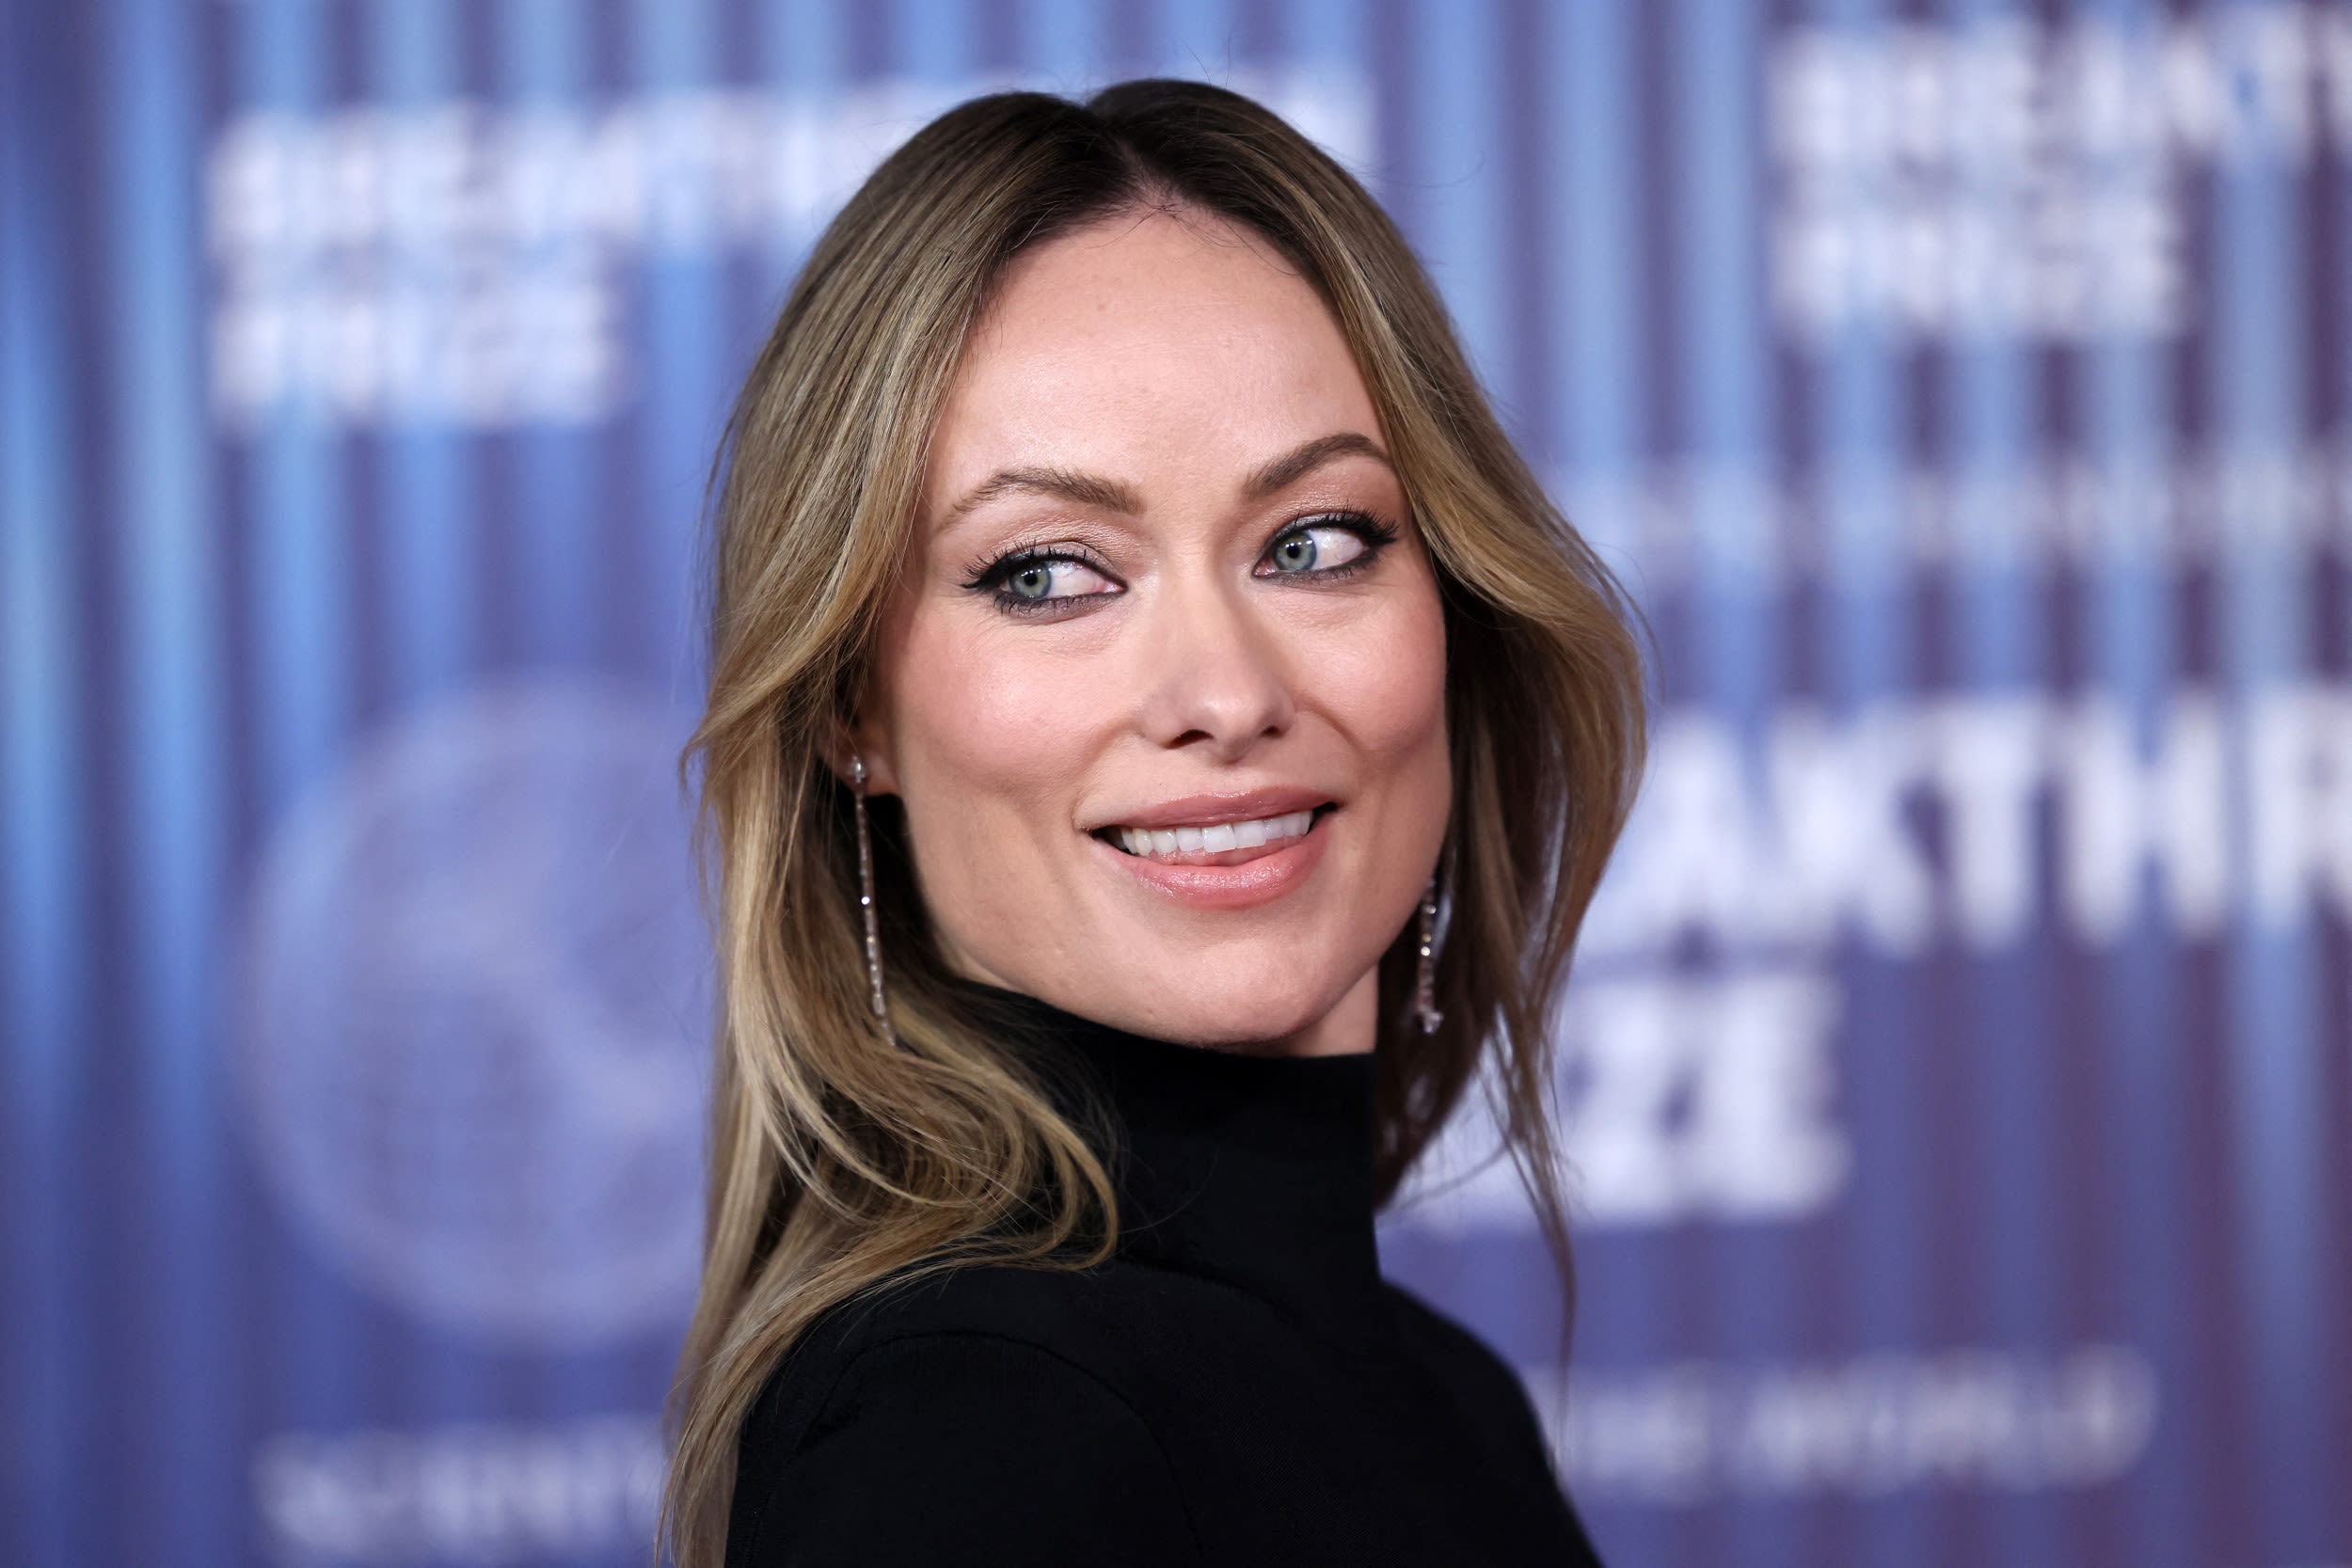 Olivia Wilde shares rare photo of 7-year-old daughter